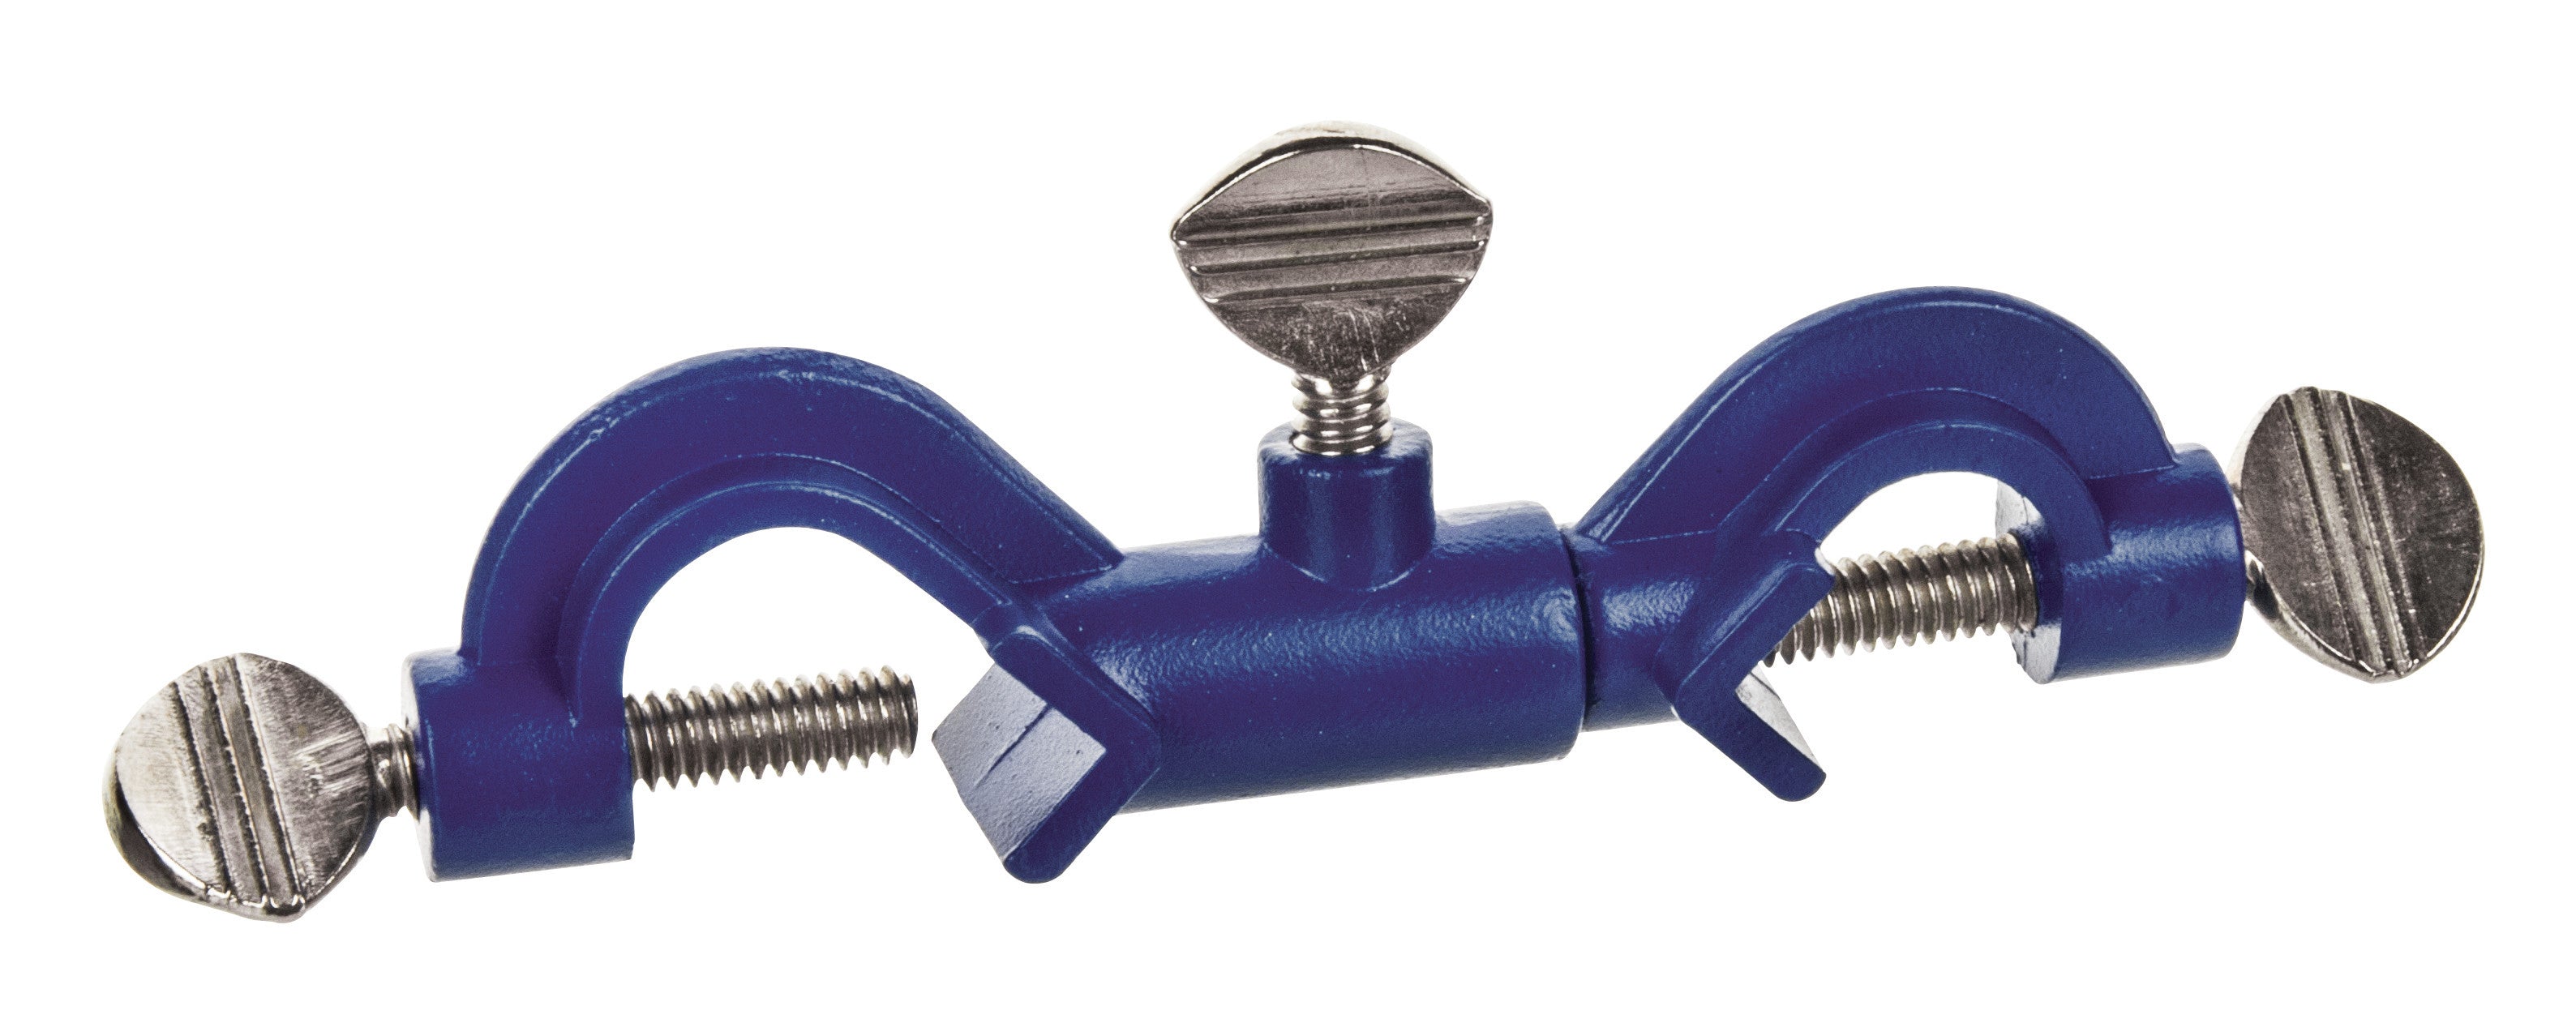 Swivel Boss Head Clamp Holder for Rods up to 3/4" (19mm) in Diameter - Adjusts to Any Angle (360 Degree Rotation)